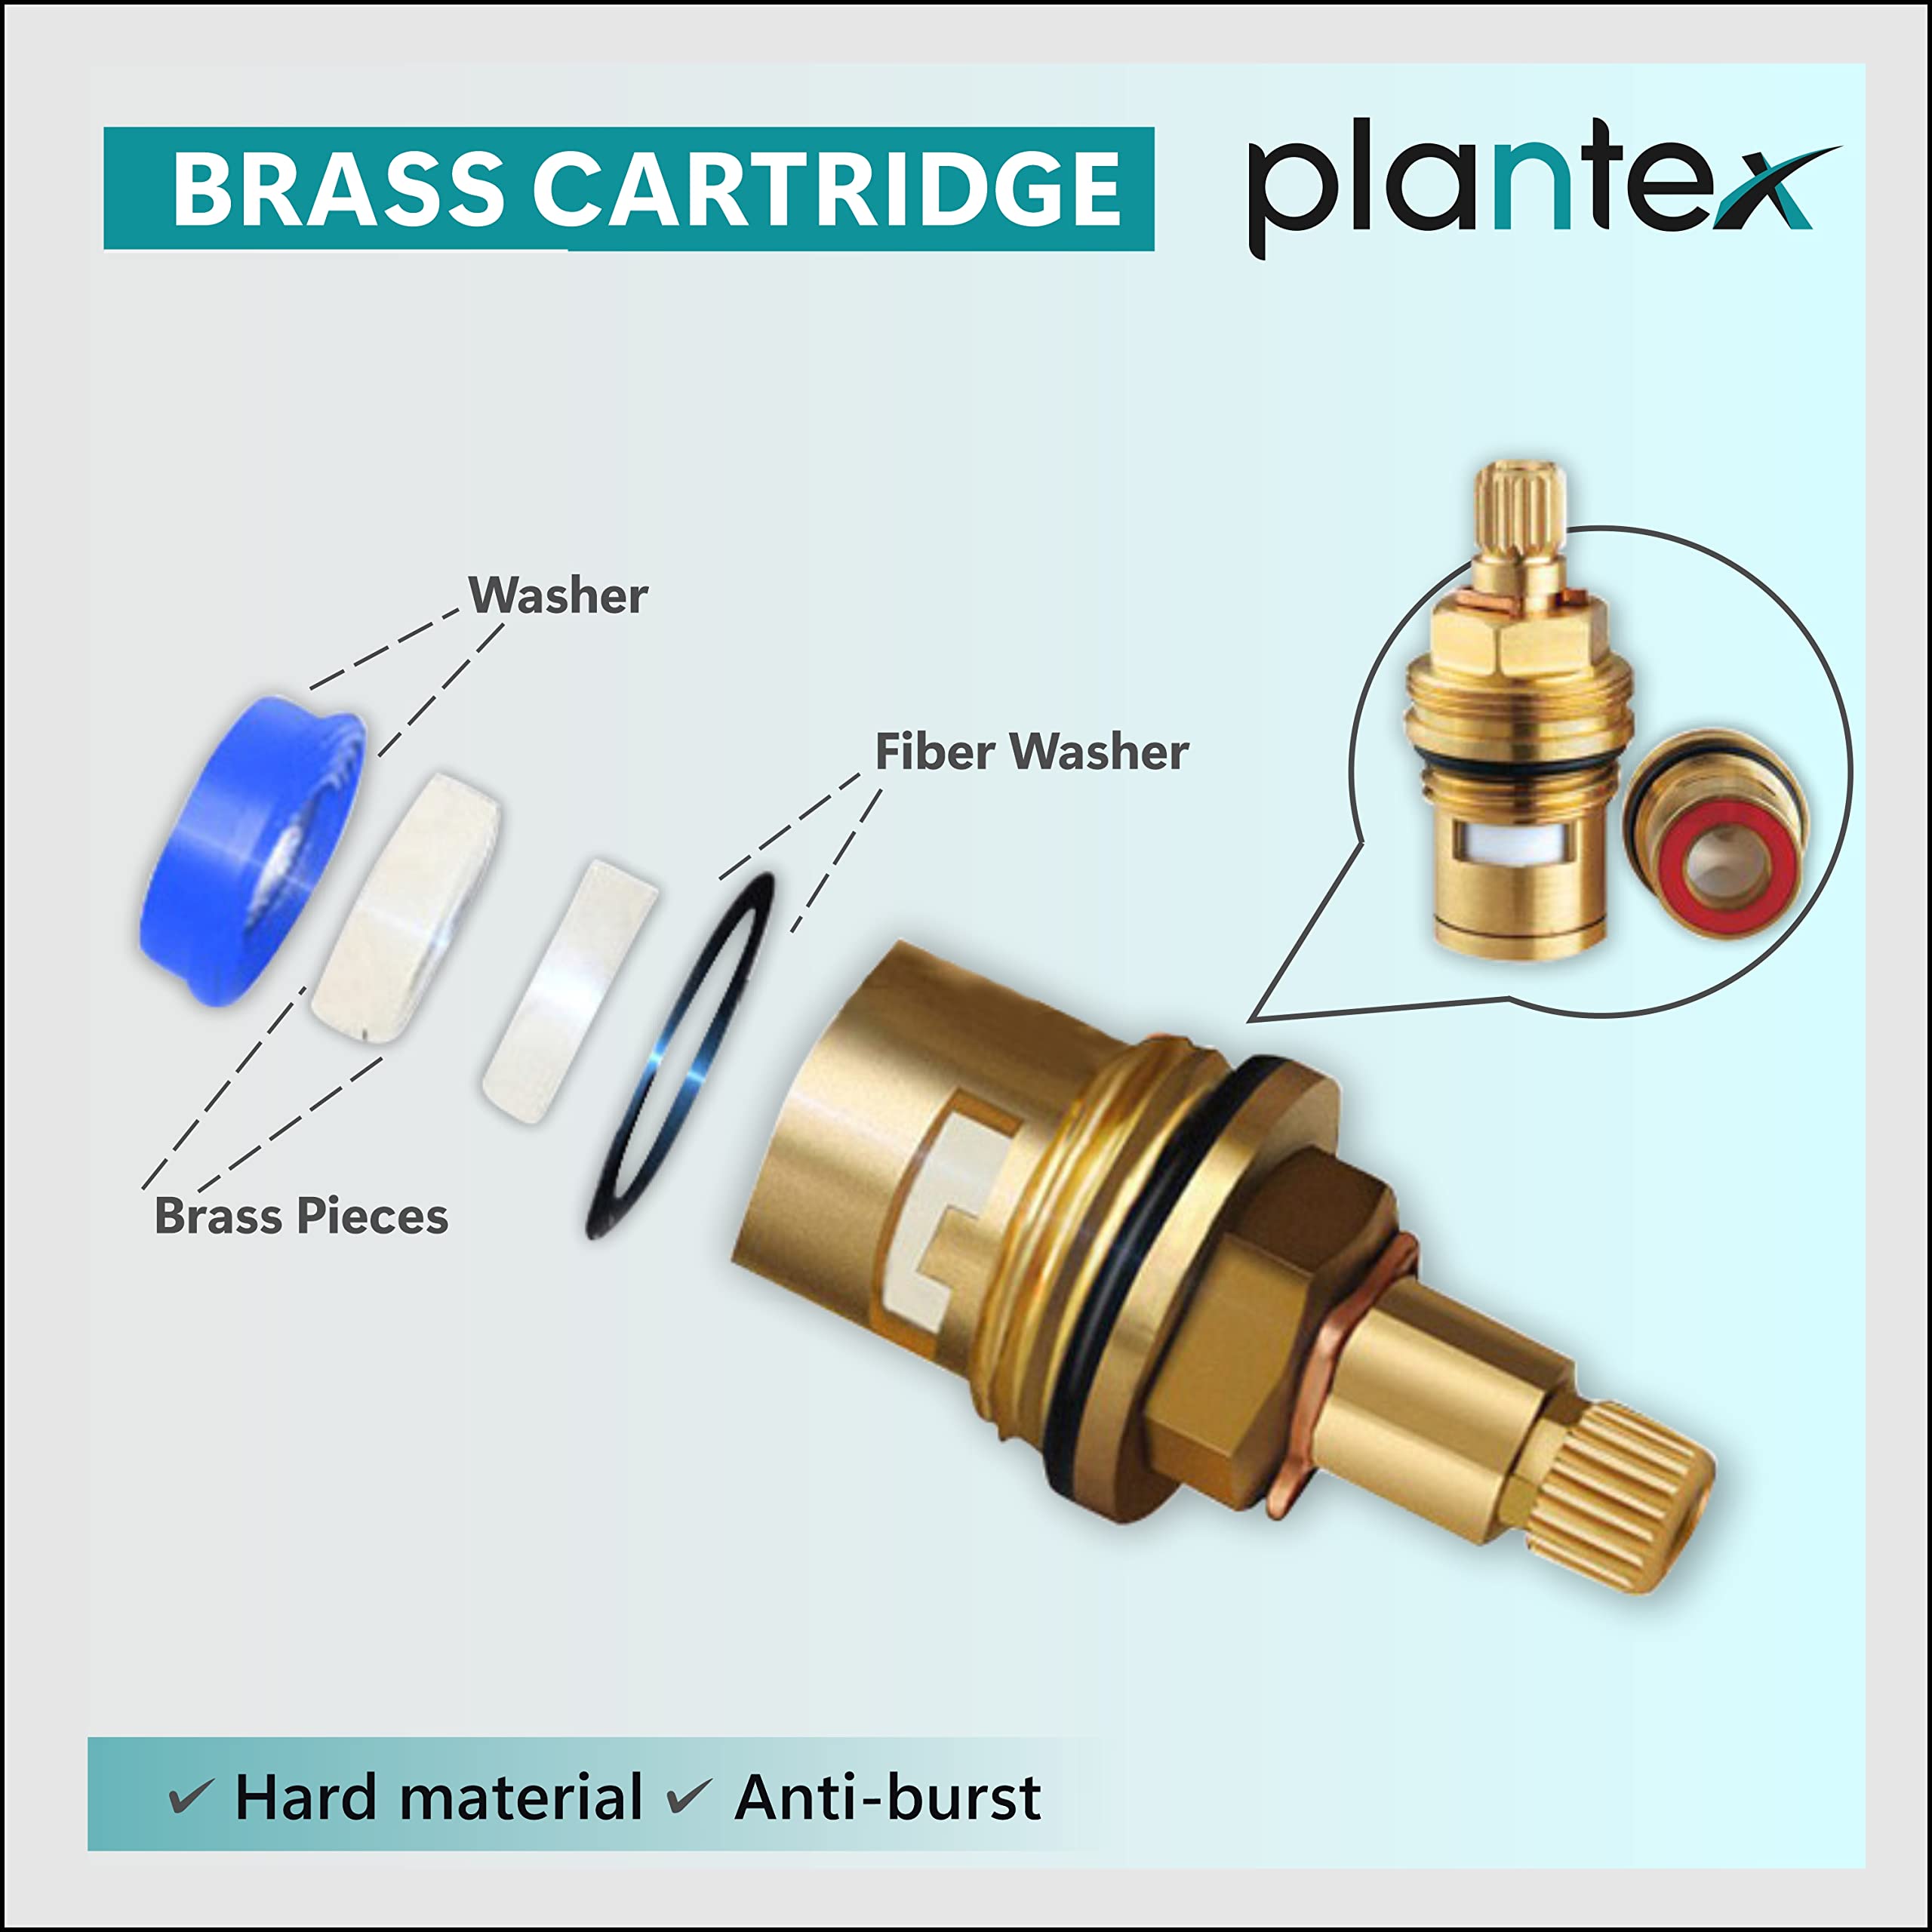 Plantex Pure Brass LEA-701 Single Lever Bib Cock for Bathroom & Kitchen Sink Tap/Basin Faucet Tap with Brass Wall Flange & Teflon Tape (Mirror-Chrome Finish)